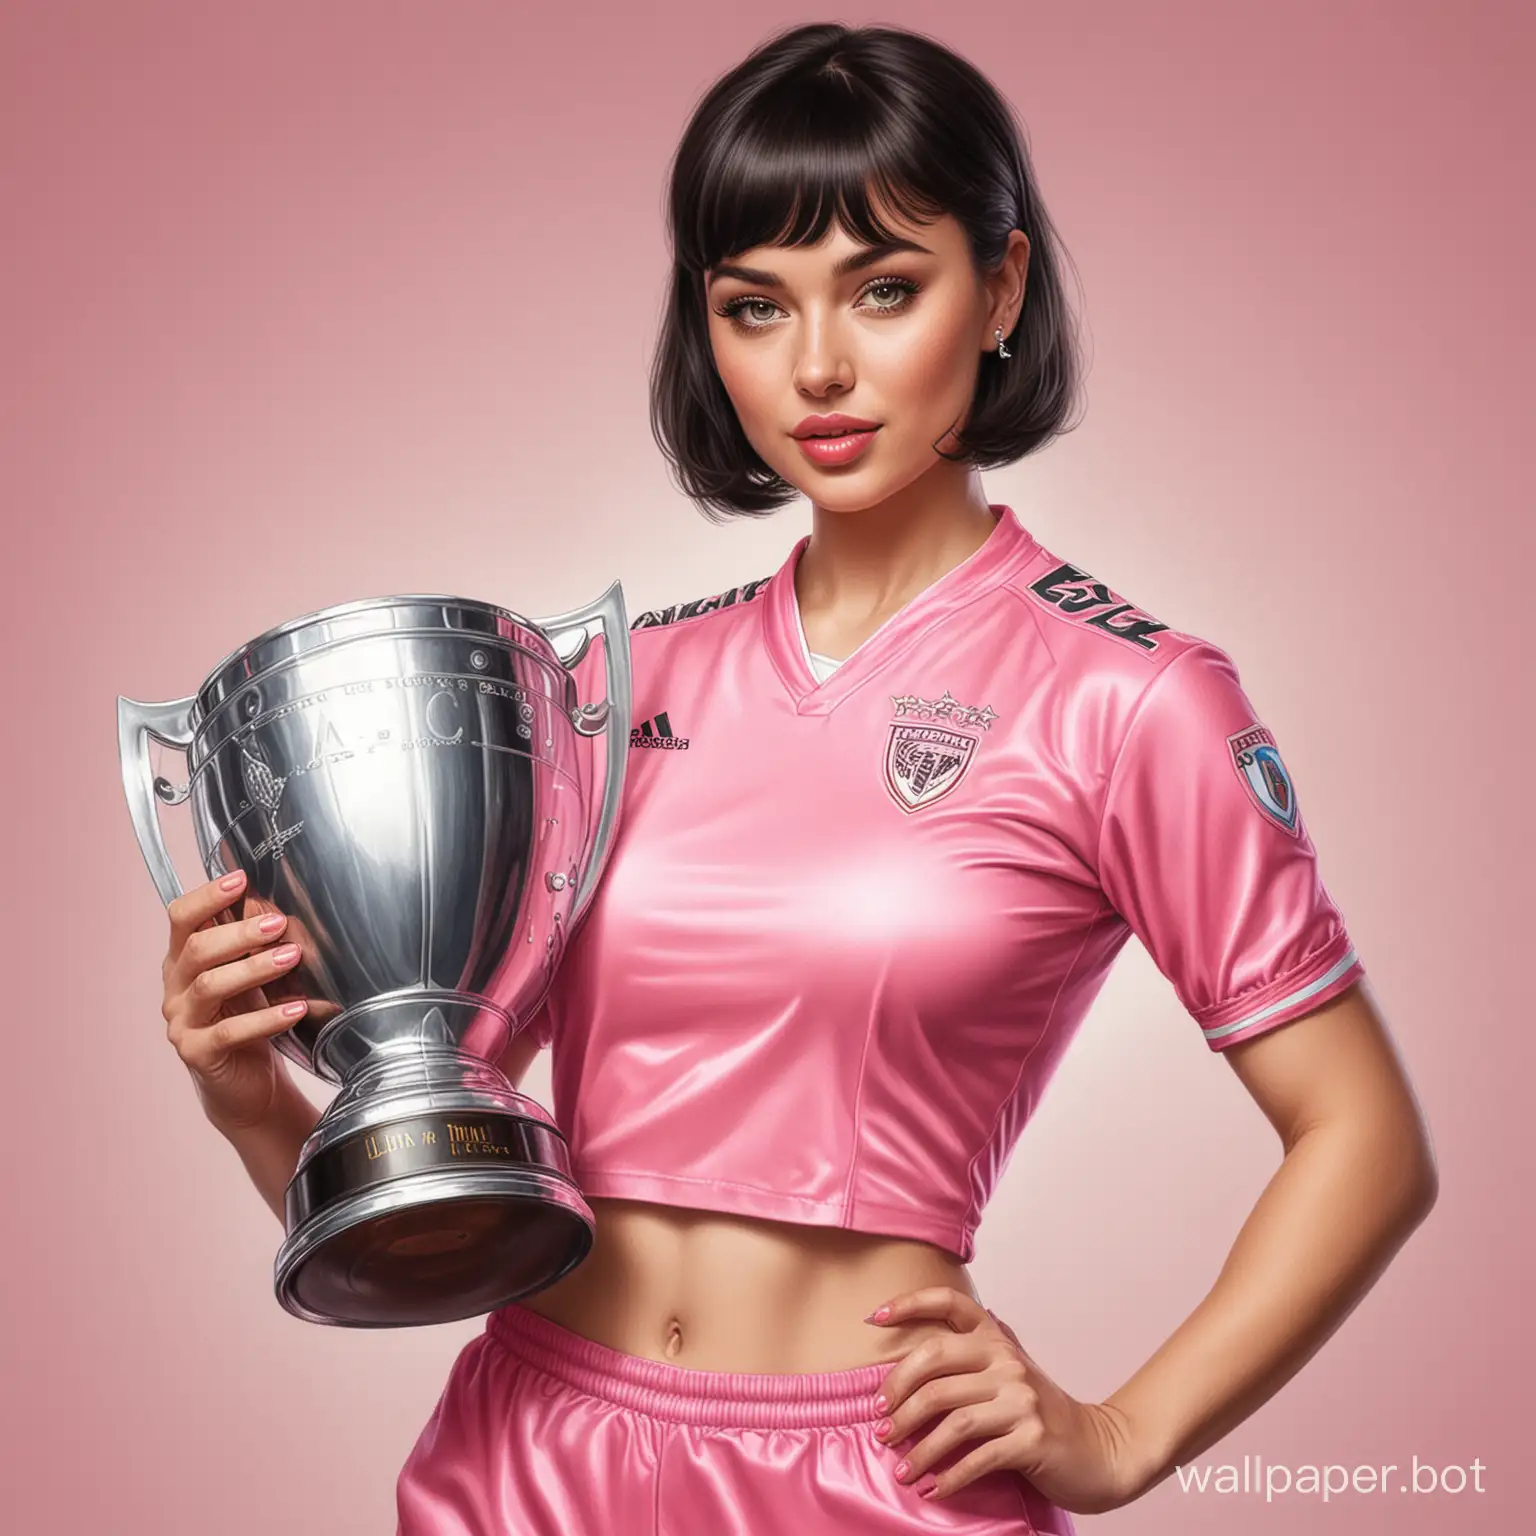 Realistic-Pinup-Drawing-of-Alina-Lanina-in-Pink-Football-Uniform-Holding-Champions-Cup